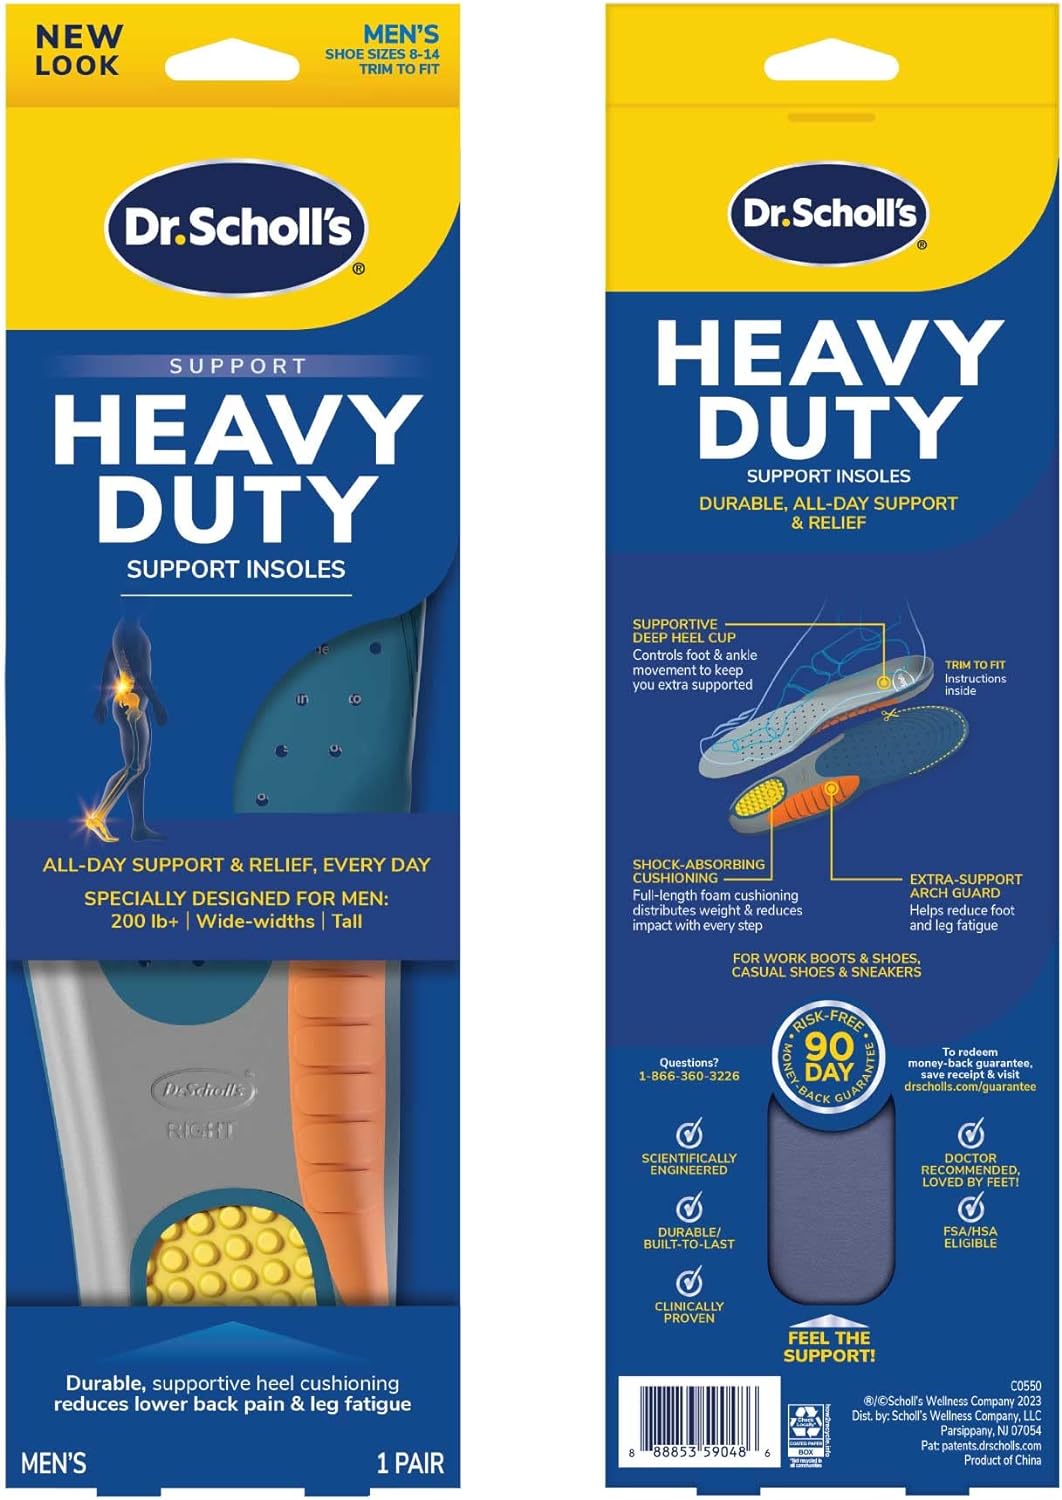 Dr. Scholls Heavy Duty Support Insole Orthotics, Big  Tall, 200lbs+, Wide Feet, Shock Absorbing, Arch Support, Distributes Pressure, Trim to Fit Inserts, Work Boots  Shoes, Men Size 8-14, 1 Pair